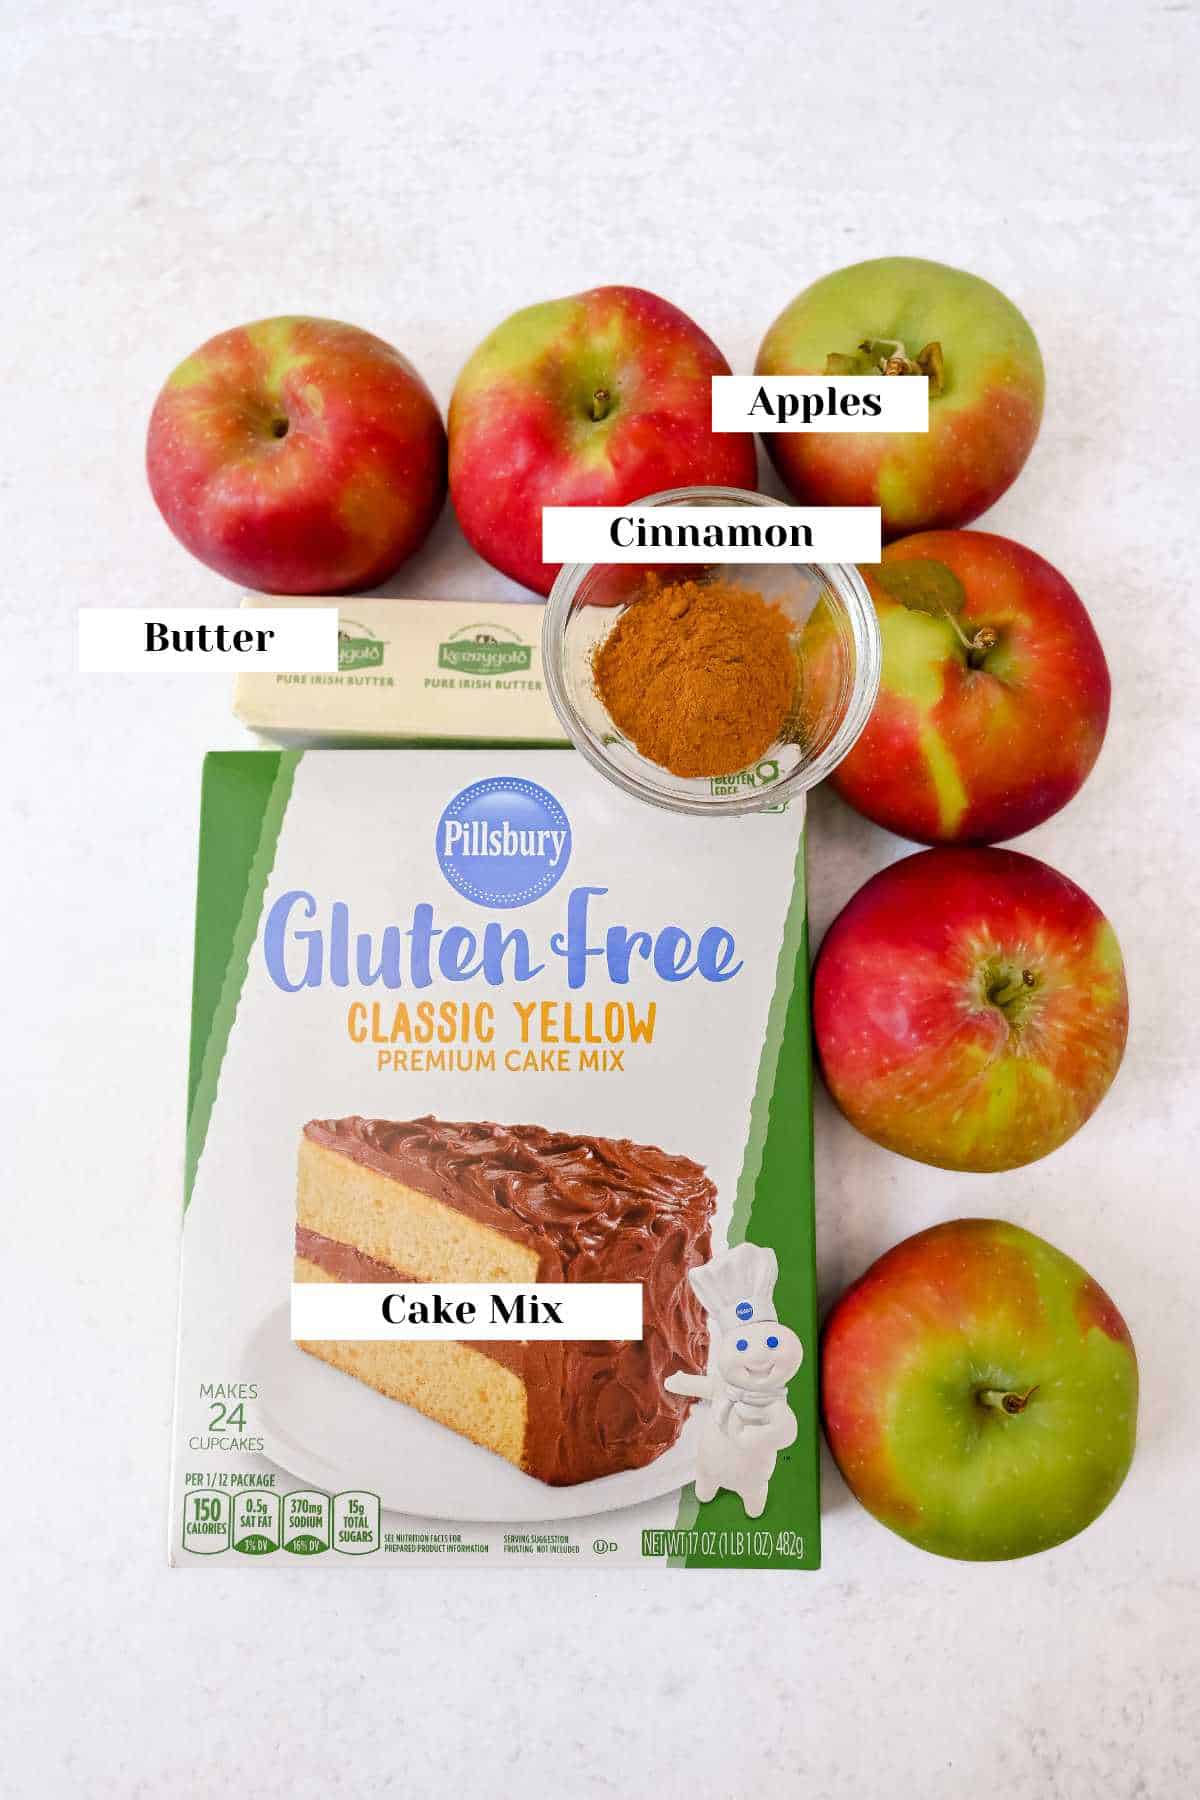 labeled ingredients for this apple cobbler with cake mix recipe.